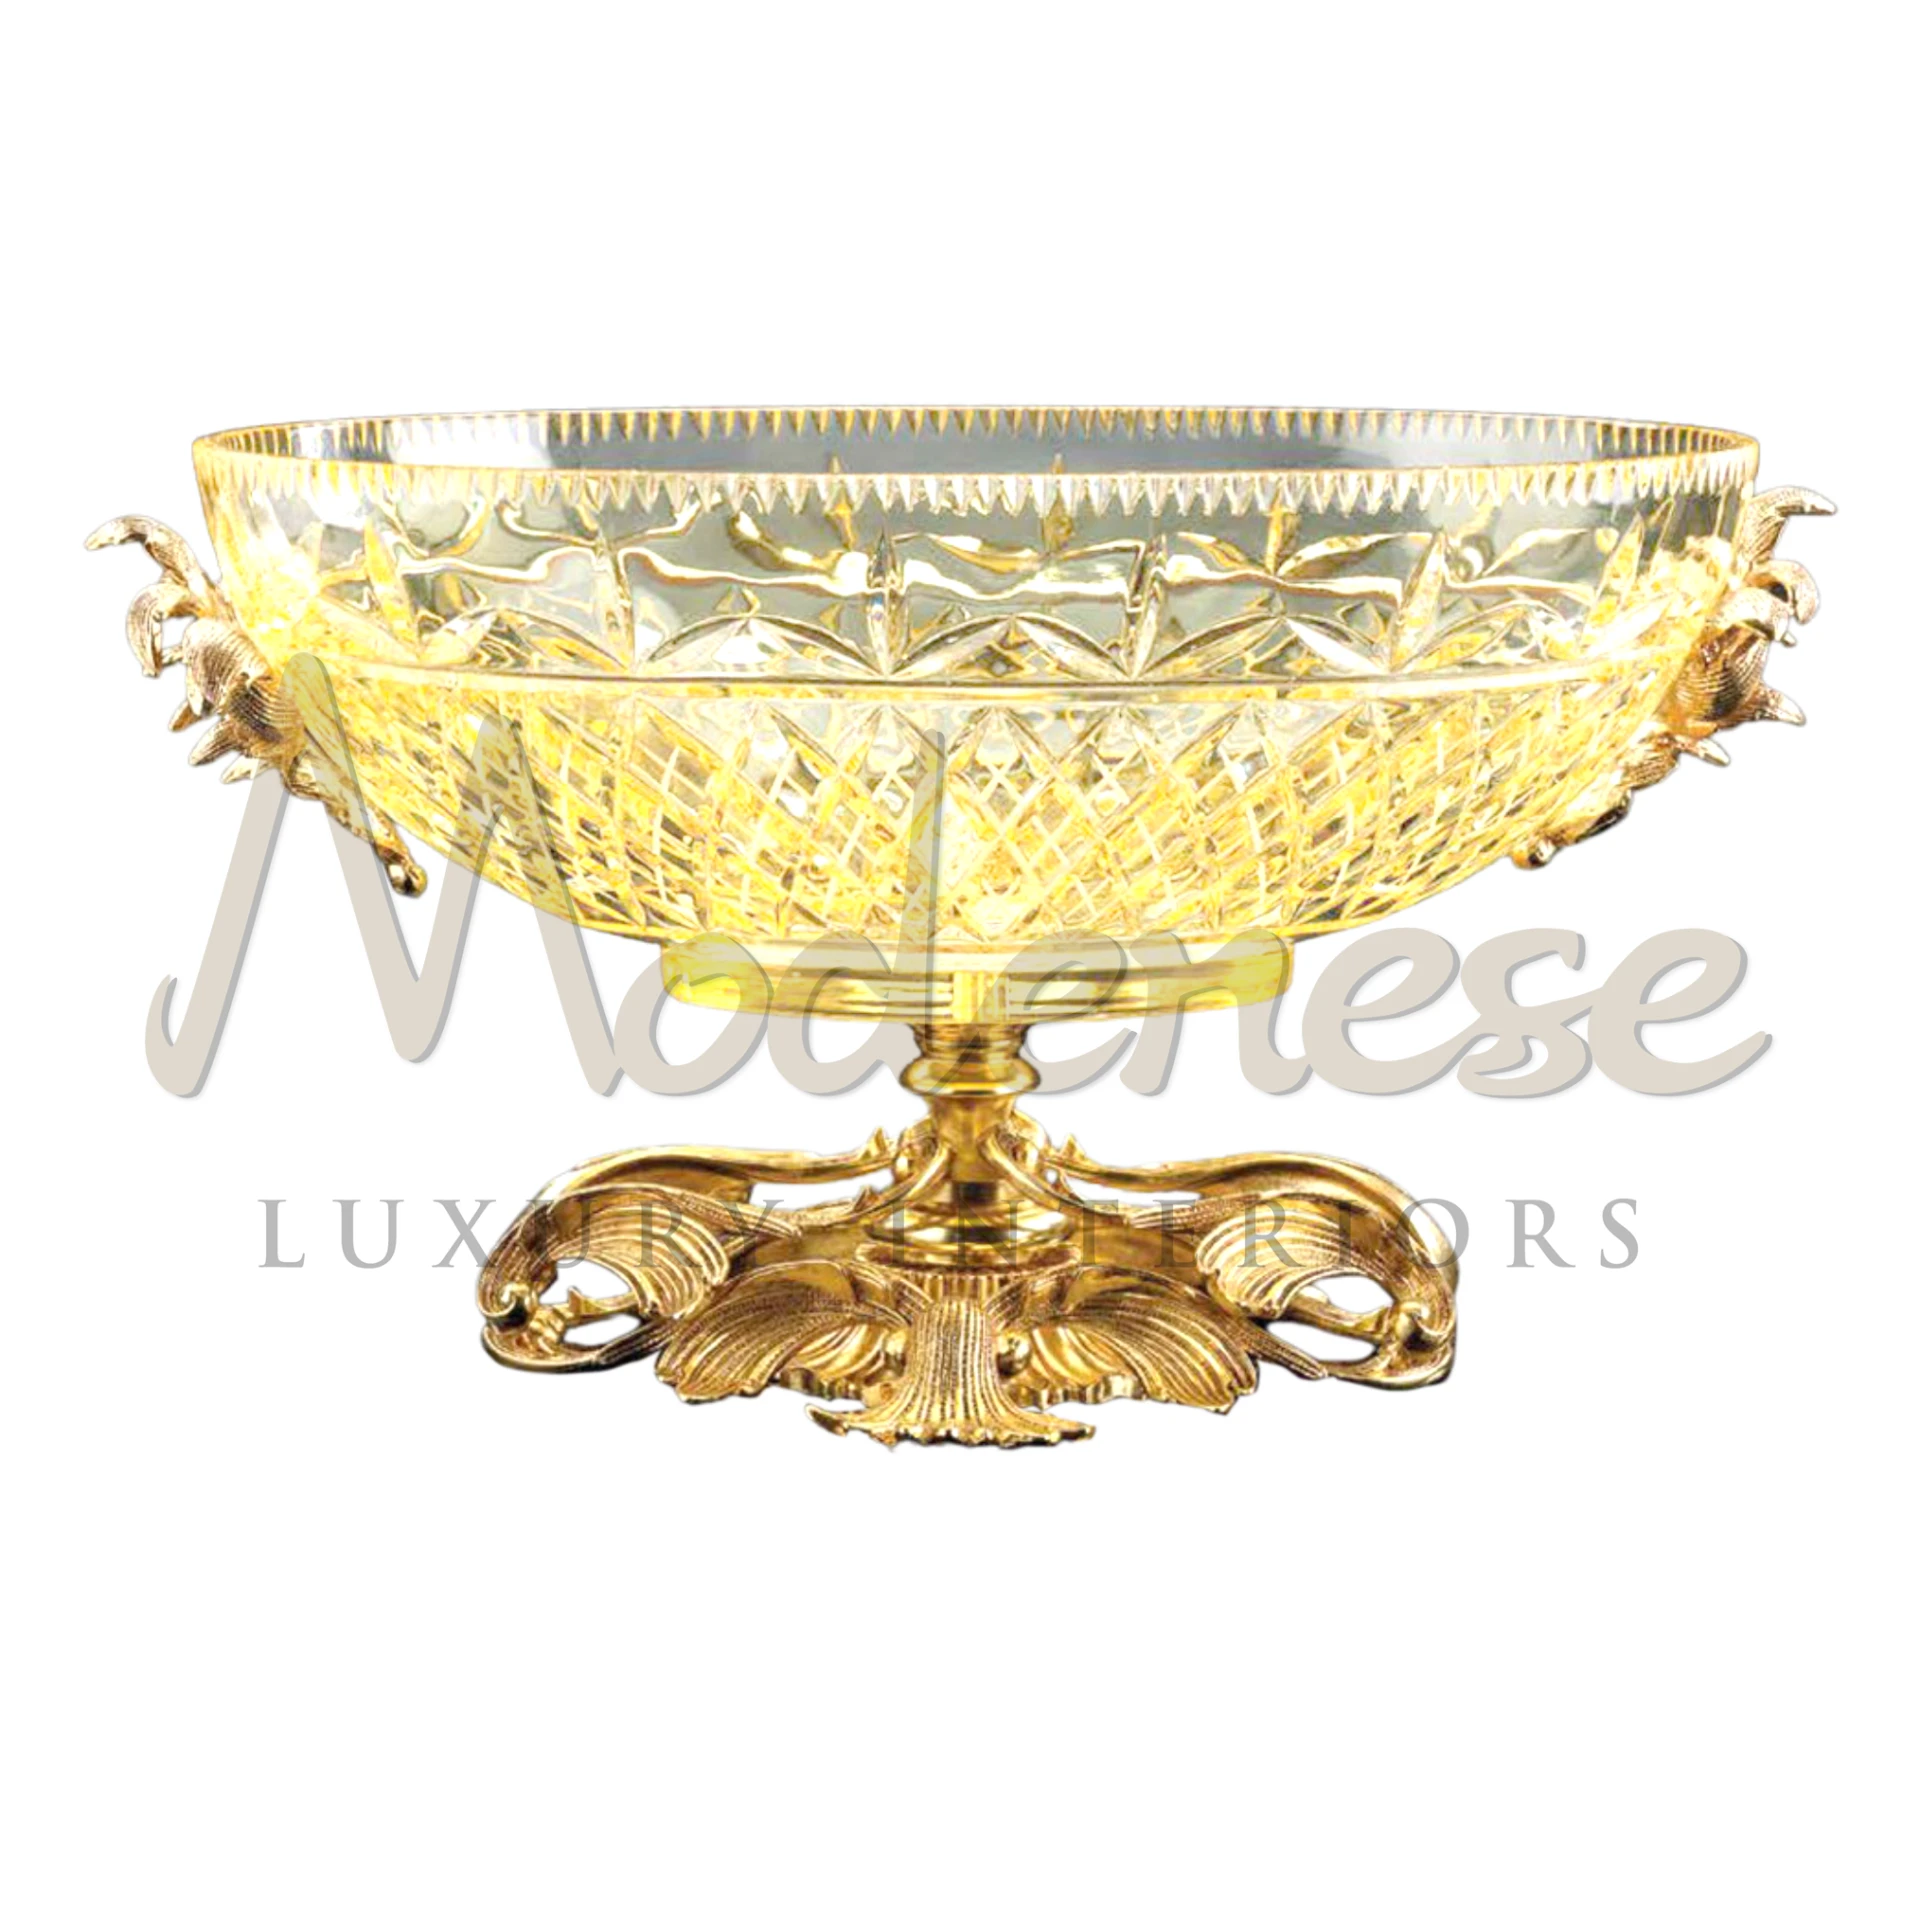 Classical Light Yellow Glass Bowl, versatile for serving or decoration, adds timeless elegance and sophistication to luxury and classic interior designs.